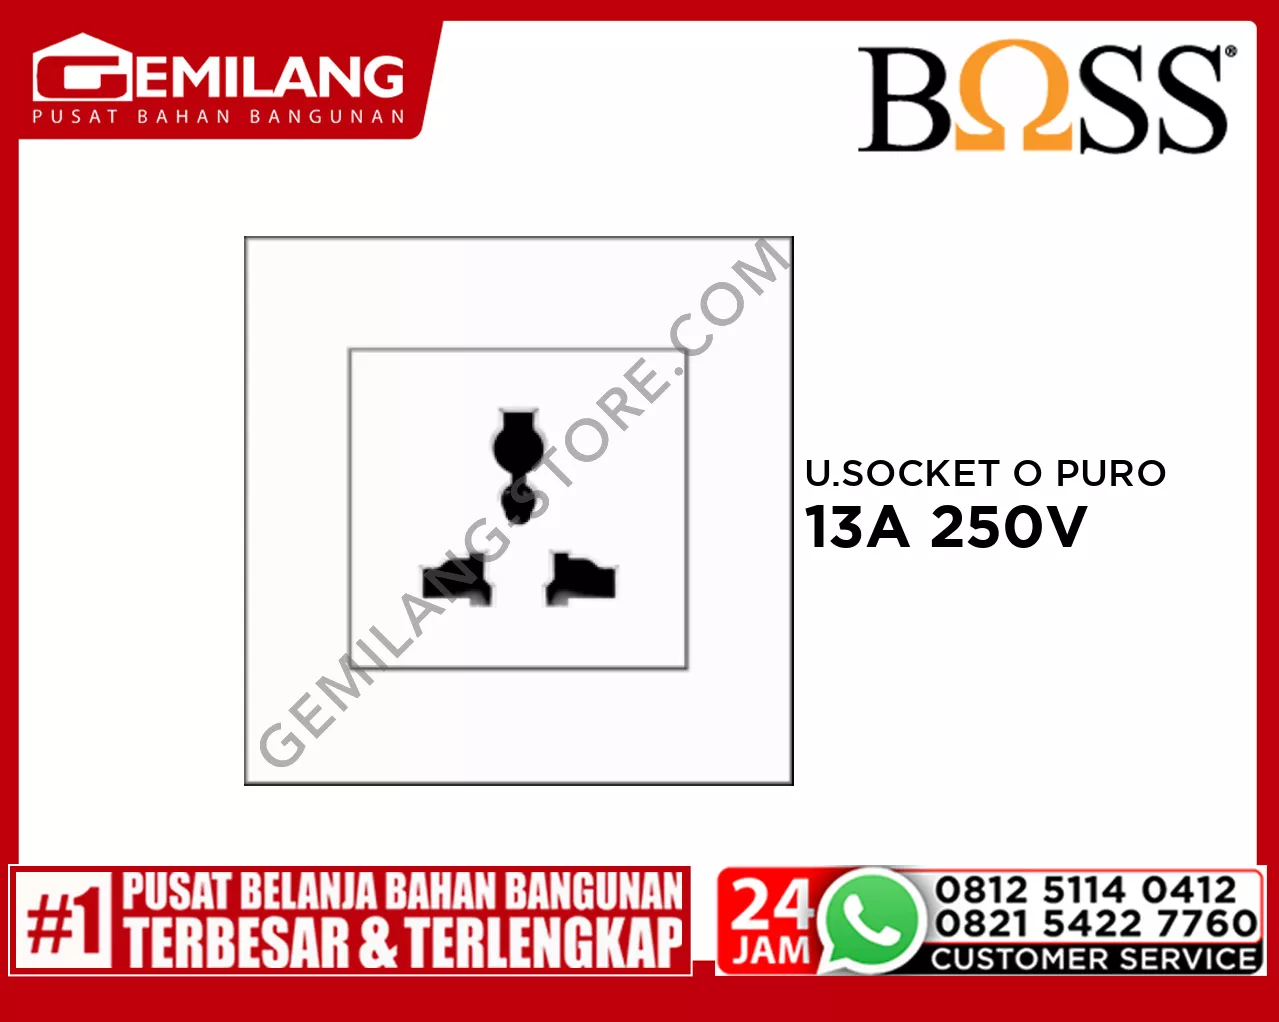 BOSS UNIVERSAL SOCKET OUTLET WITH SAFETY SHUTTER B1000 PURO 13A 250V B10413S